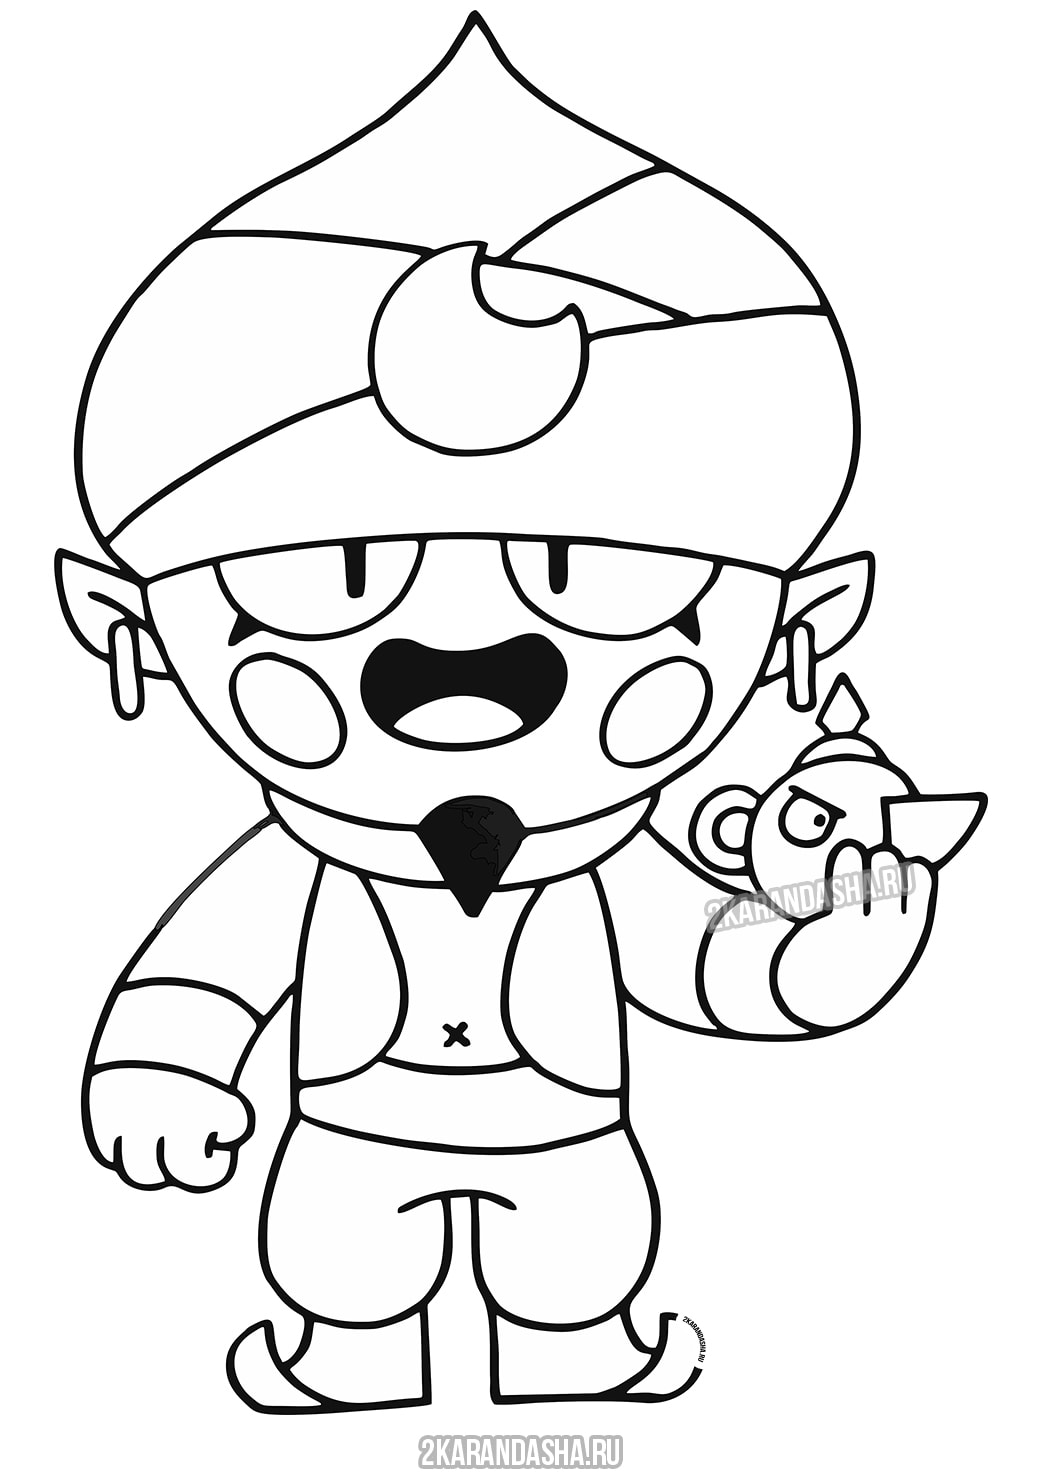 Coloring Page Brawl Stars Genie Skin With Lamp Print Brawl Stars - brawl stars genie